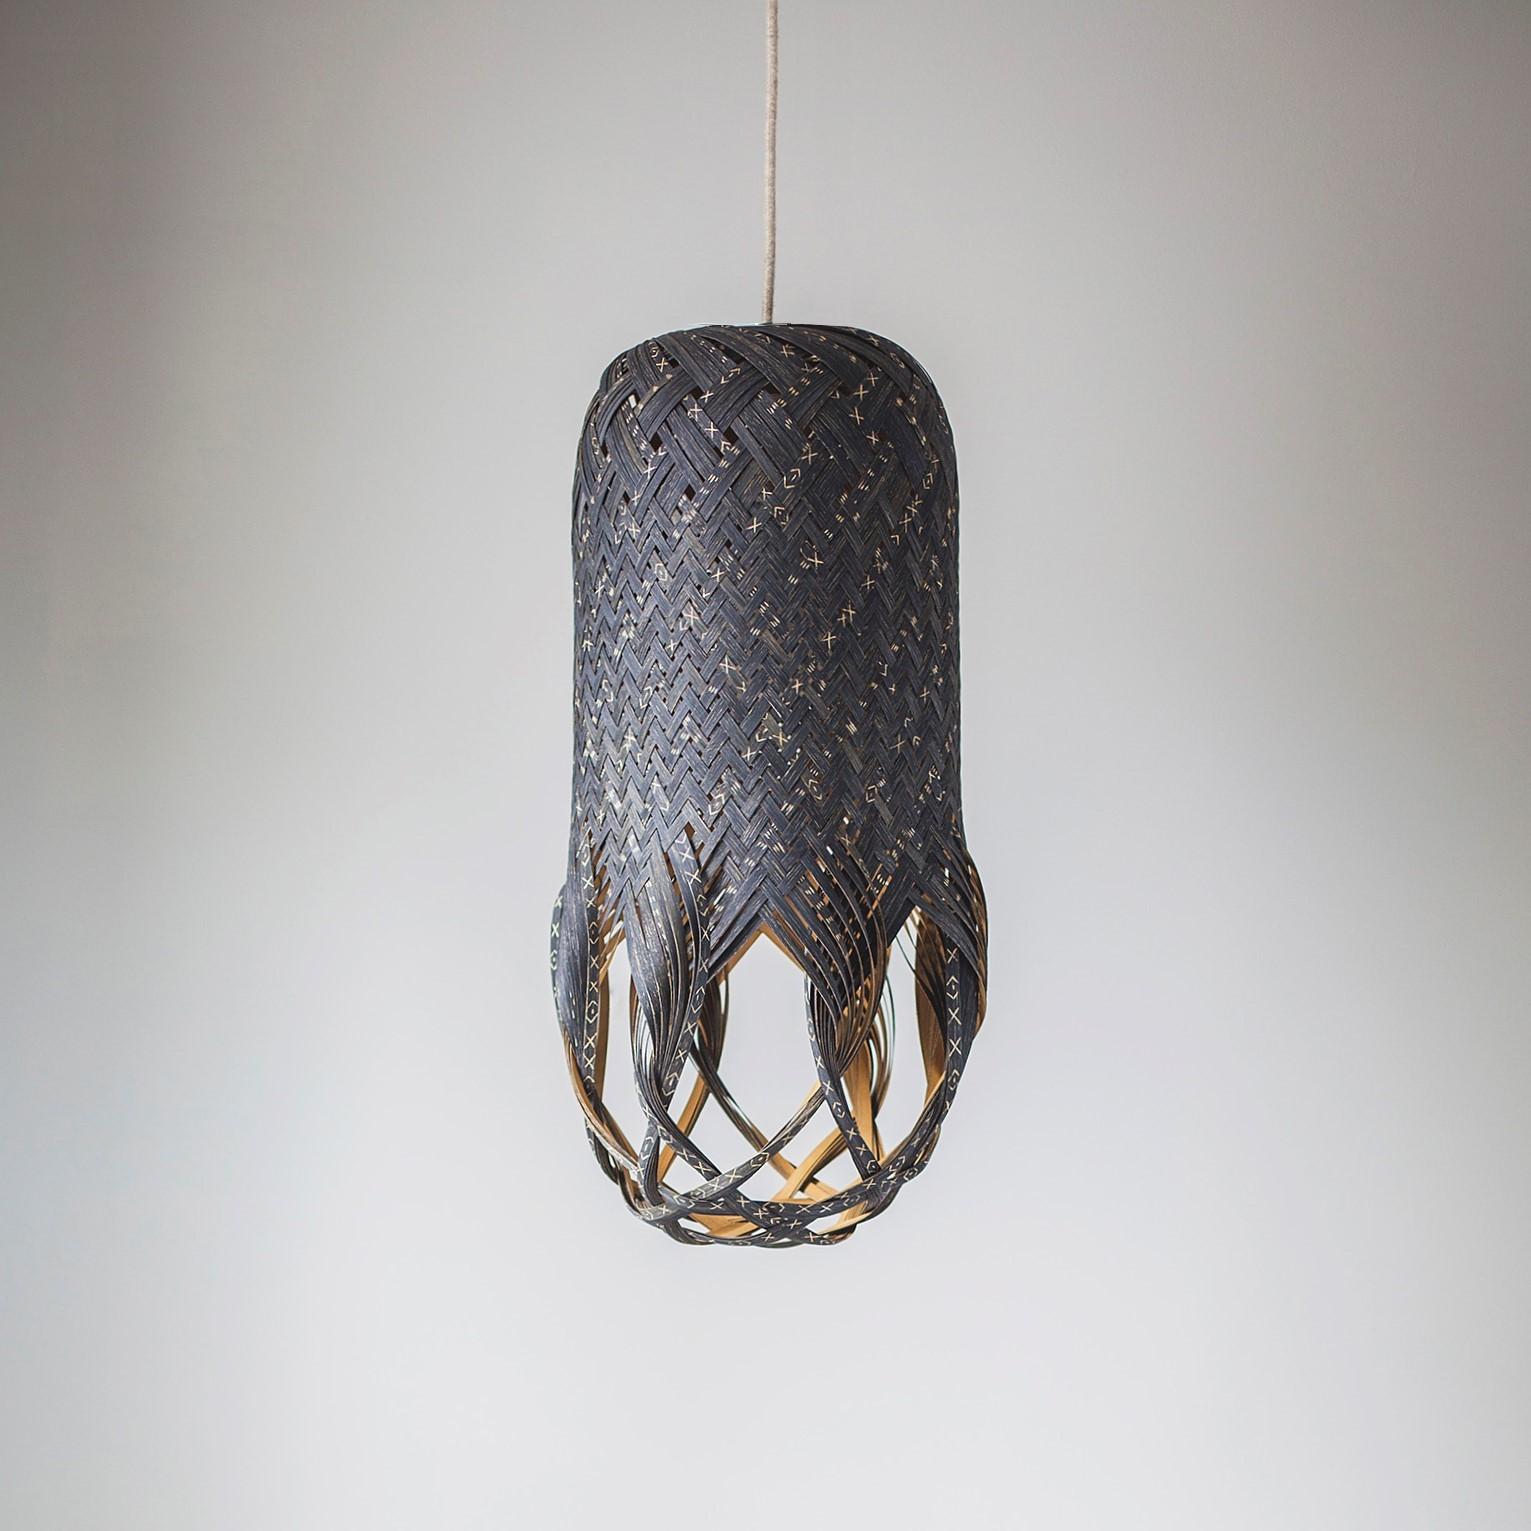 The KUTCH01 pendant light is a unique one-of-a-kind piece.  Handwoven by the artist, Louise Tucker. The light was created as an artistic response to an artist residency in the Kutch desert region in India.  The piece has been carefully crafted out